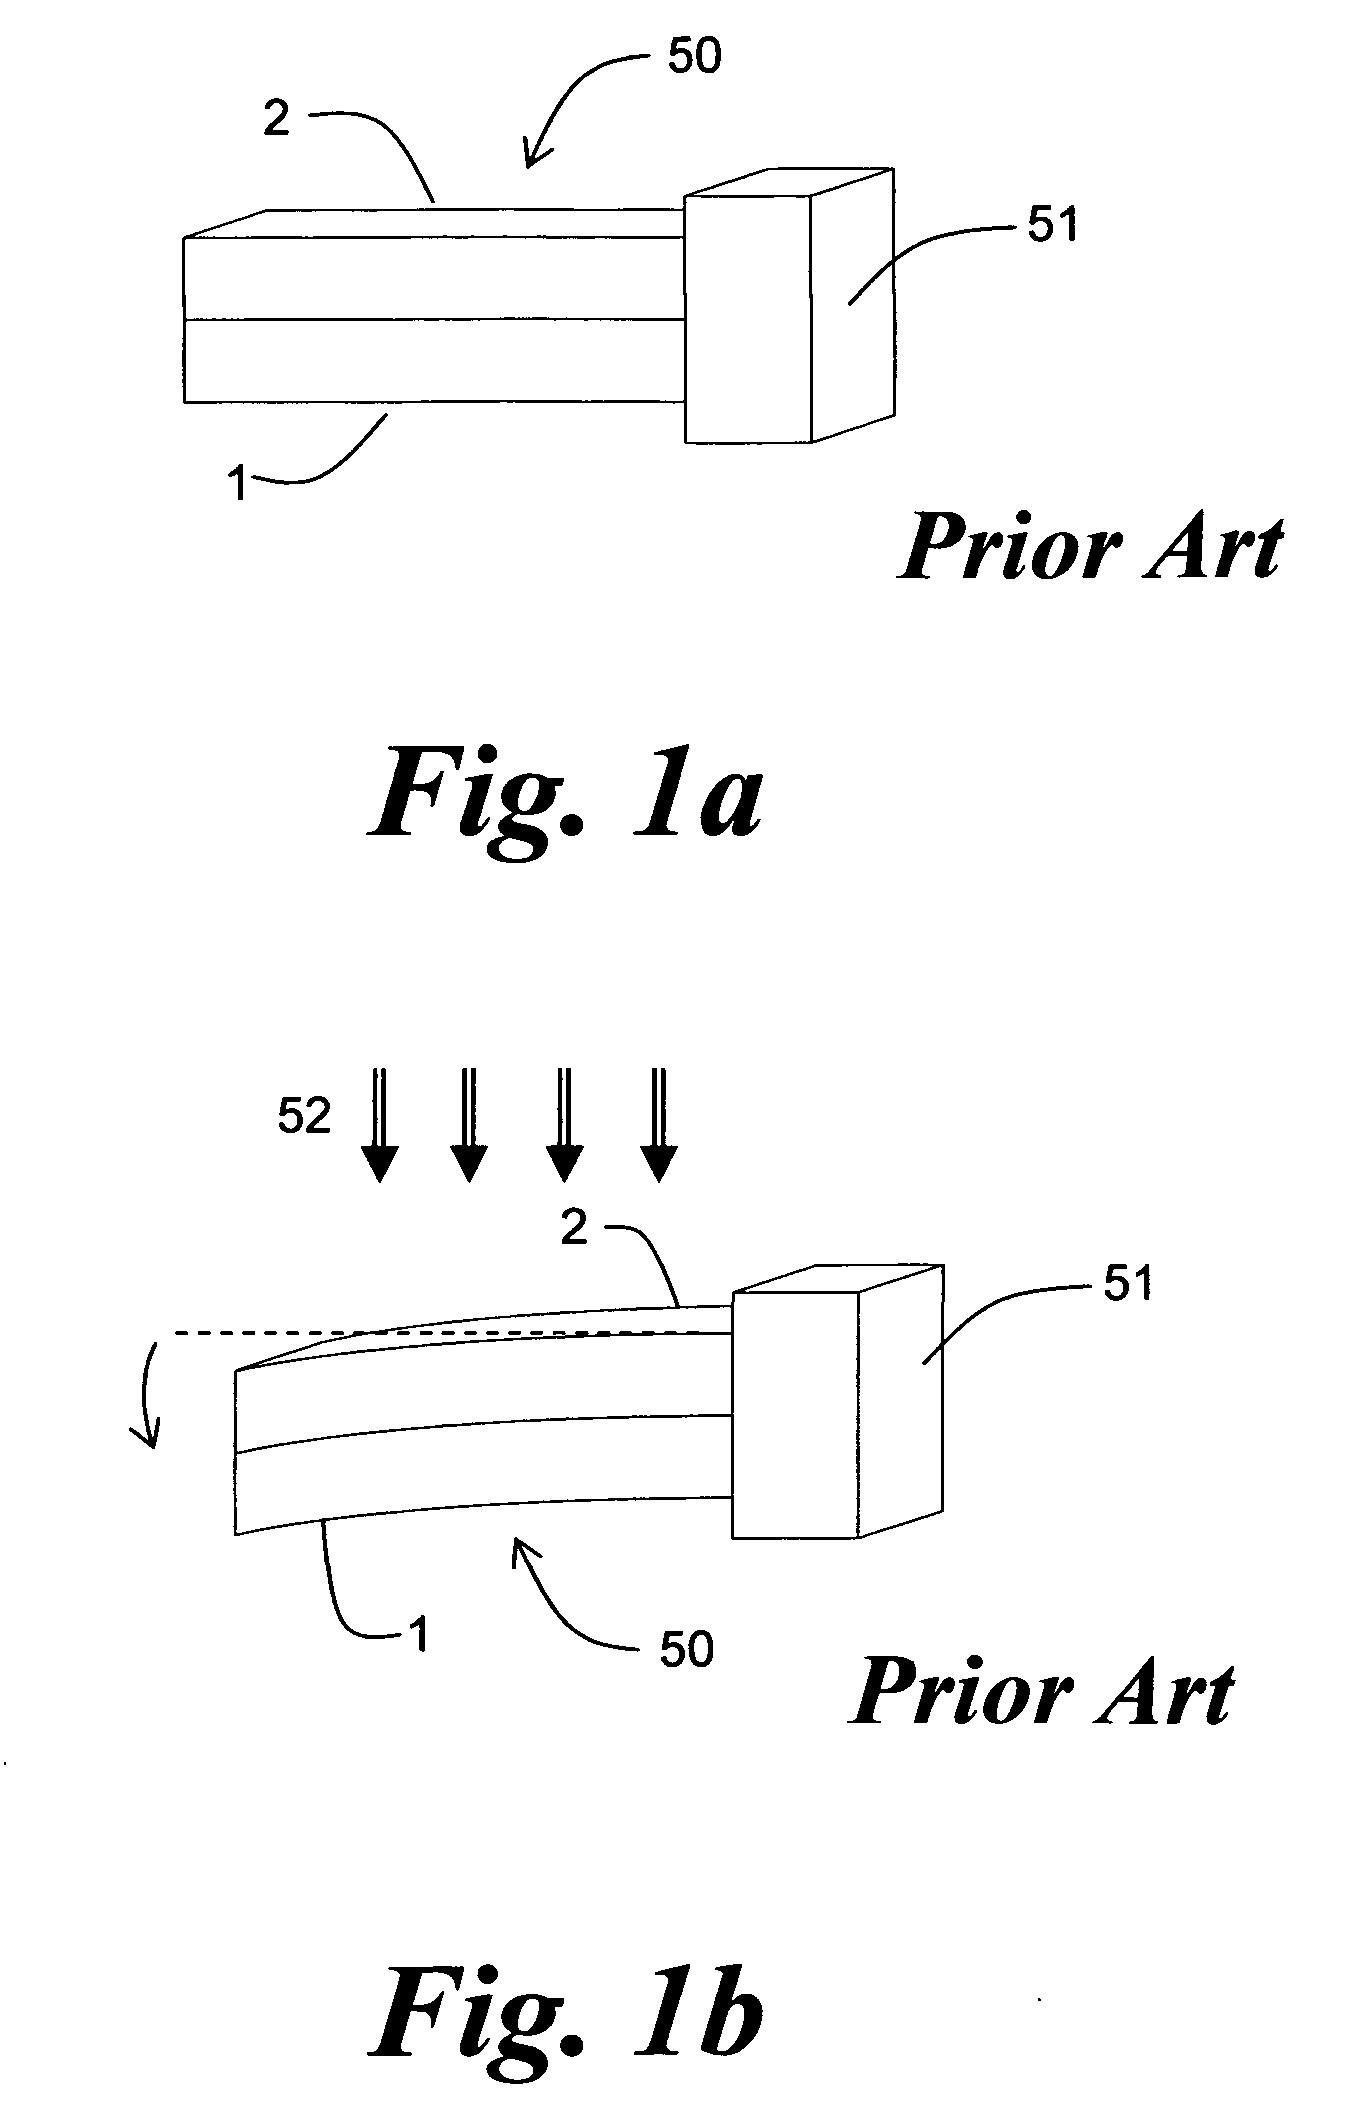 Micromechanical device for infrared sensing